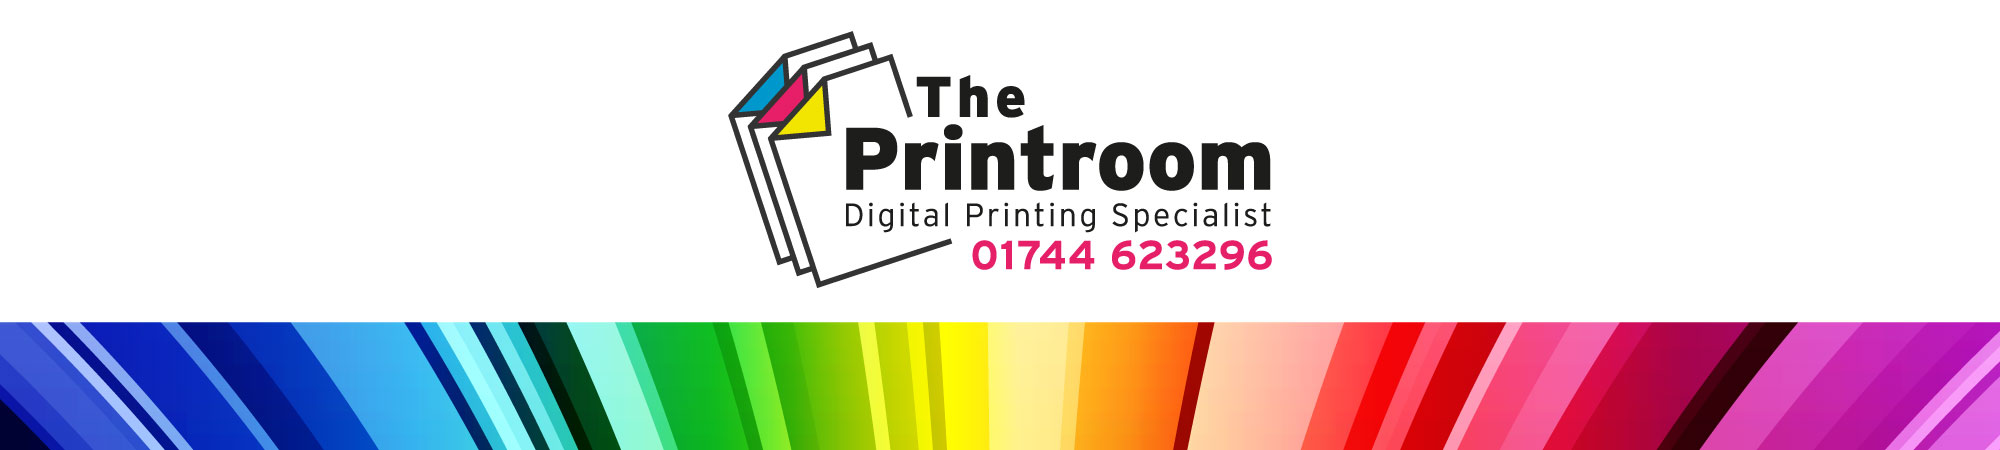 Picture with the Print Room logo and the contact number of 01744 623296